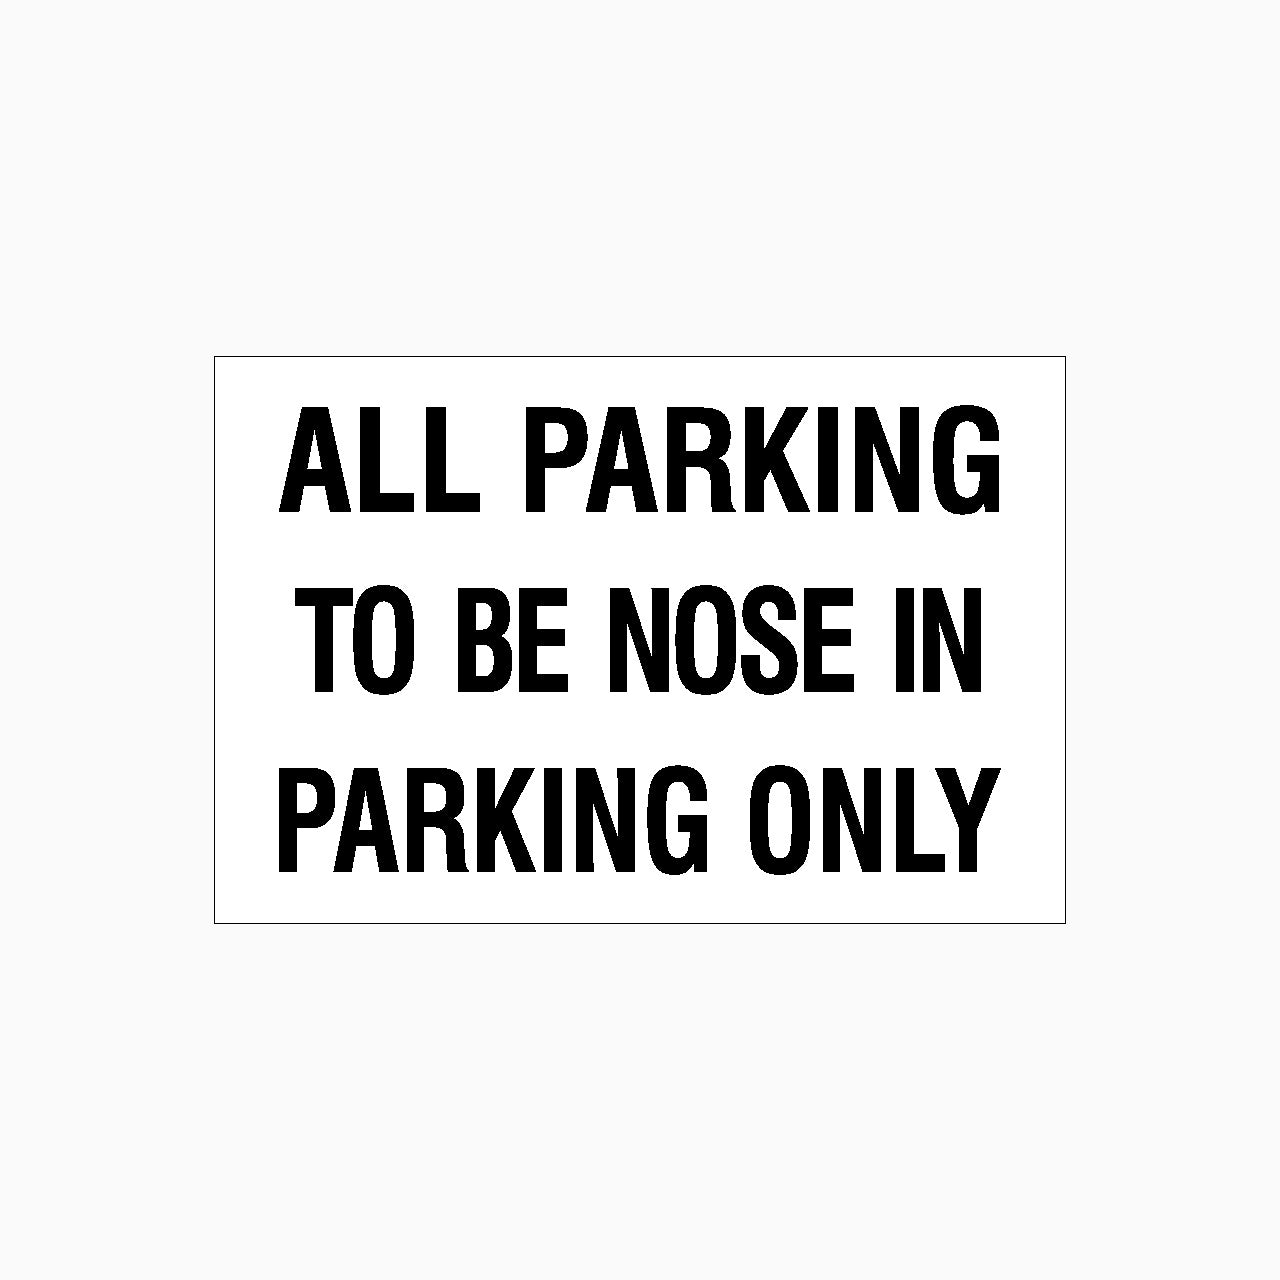 ALL PARKING TO BE NOSE IN PARKING ONLY SIGN